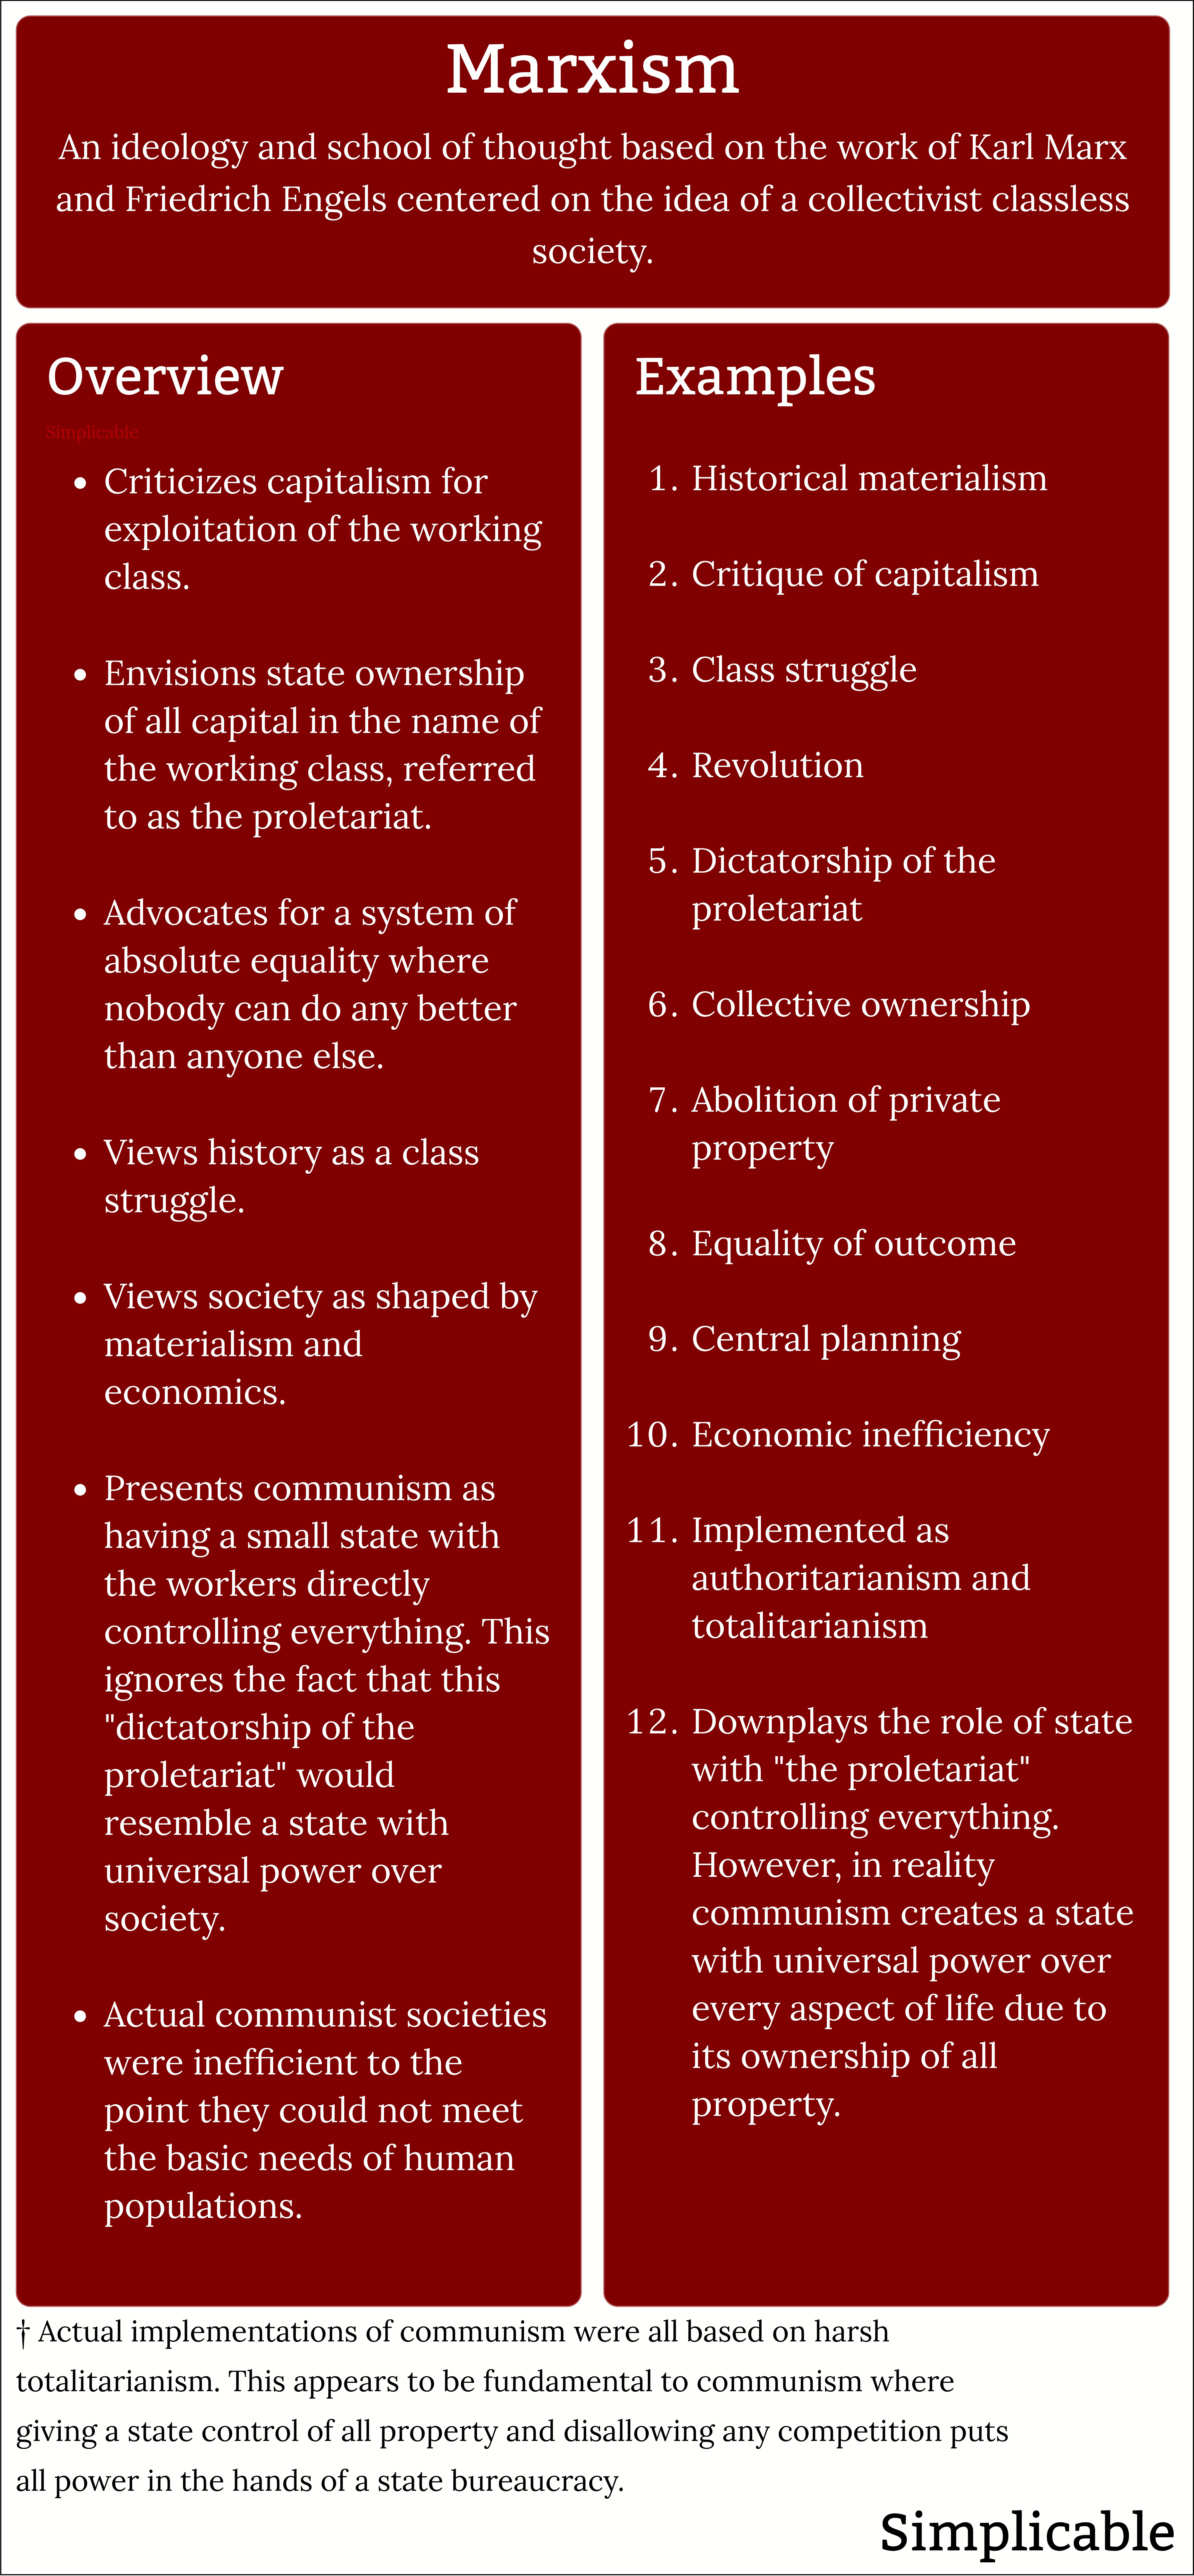 marxism overview and examples